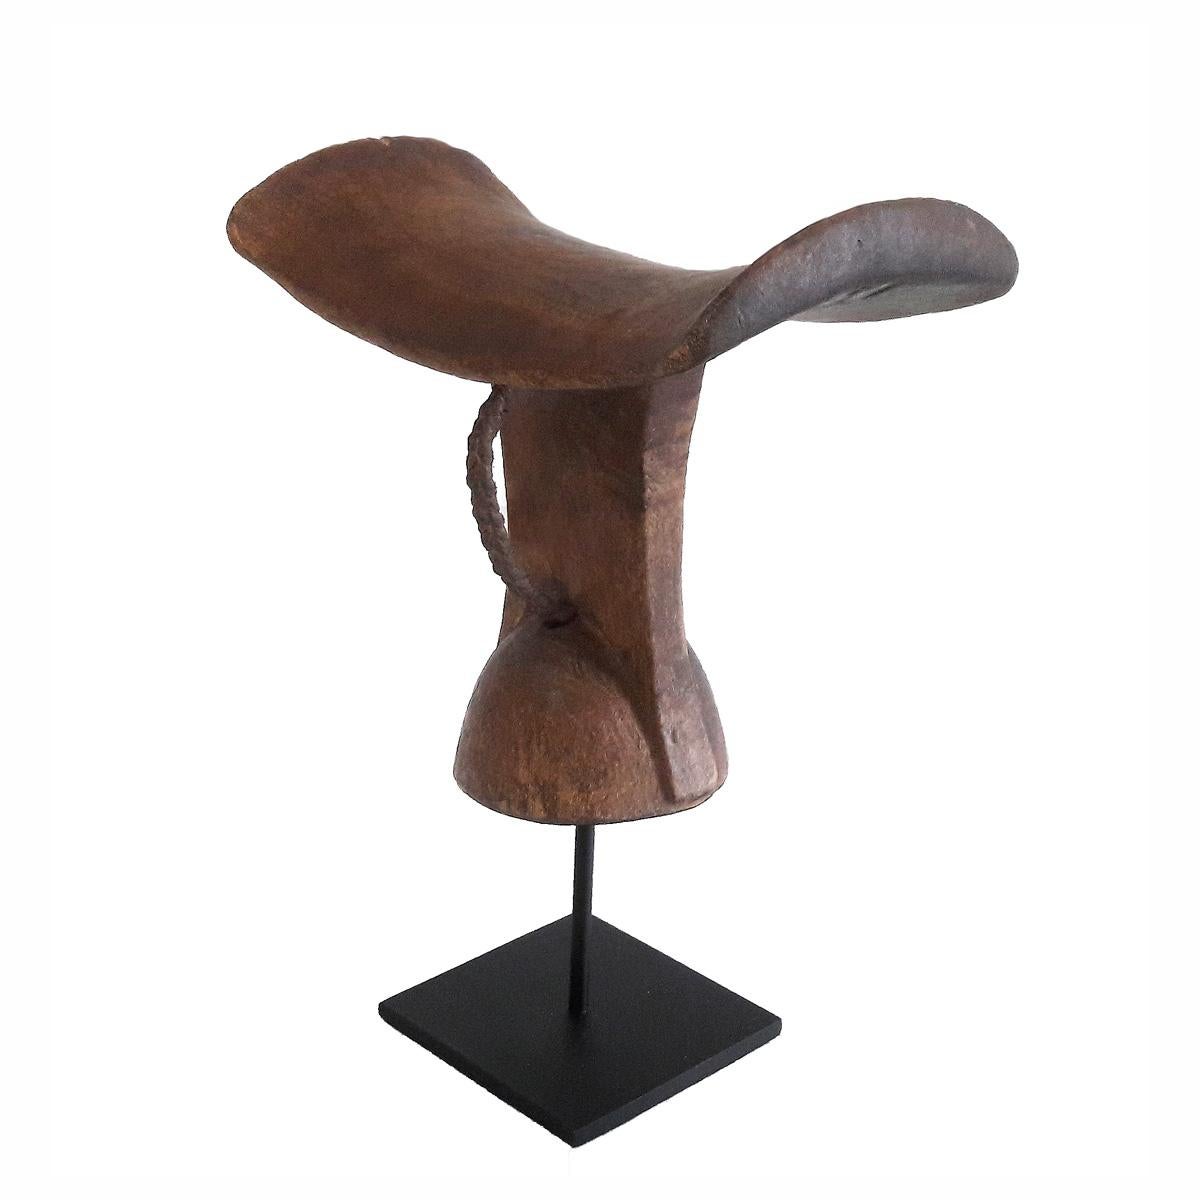 A headrest or stool, hand carved out of a single piece of teak wood. From Ethiopia, late 20th century. Mounted on a black metal stand.